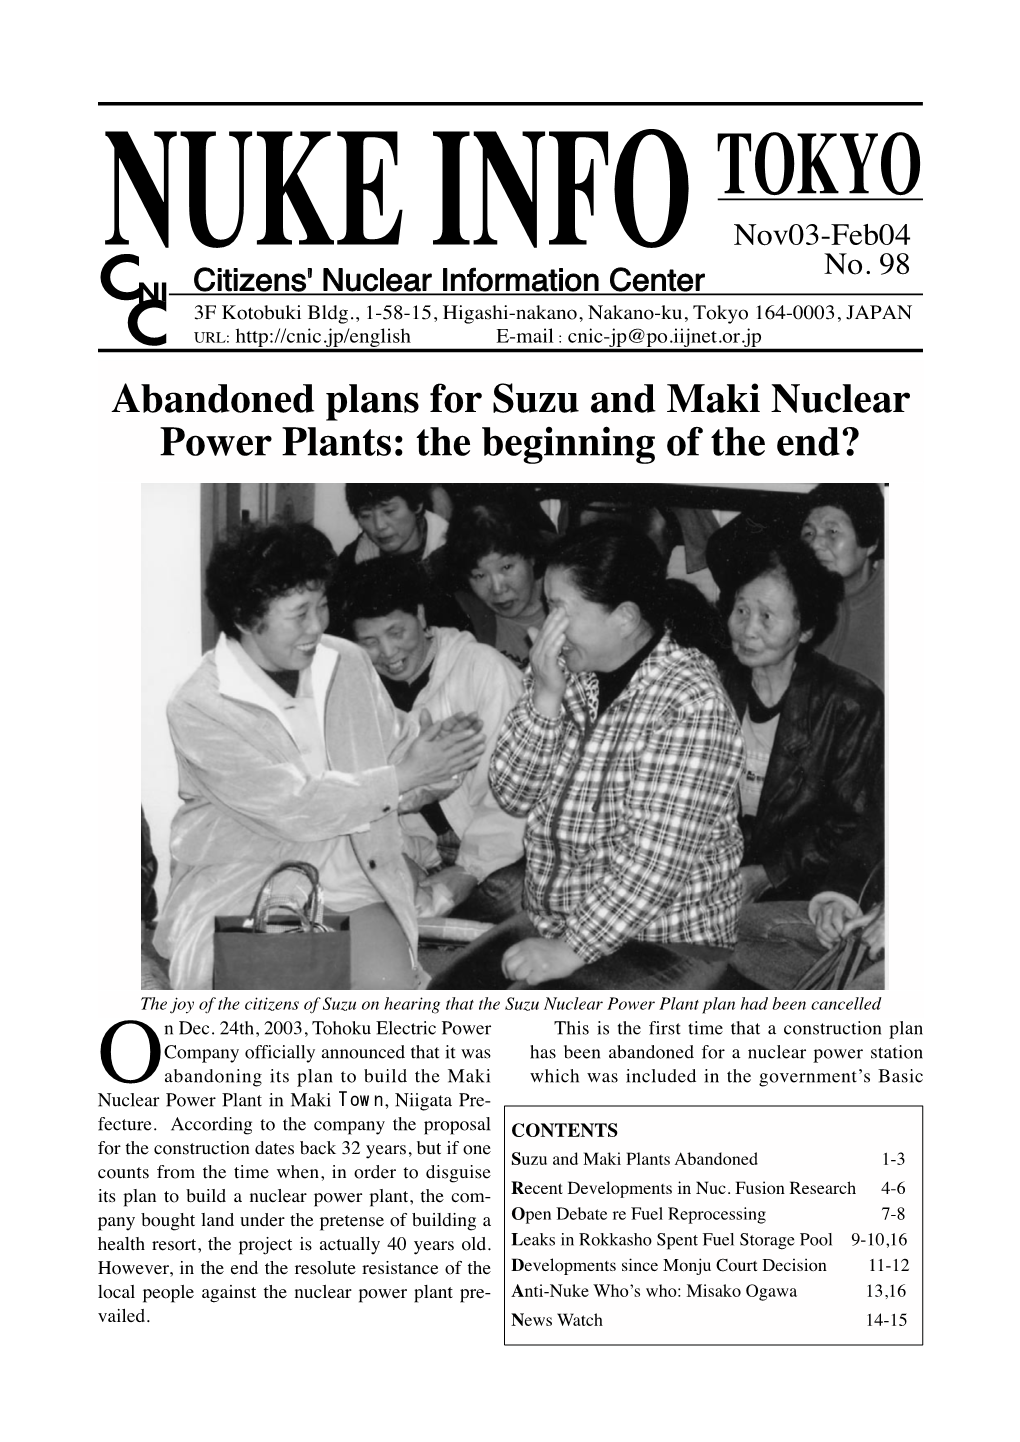 Abandoned Plans for Suzu and Maki Nuclear Power Plants: the Beginning of the End?